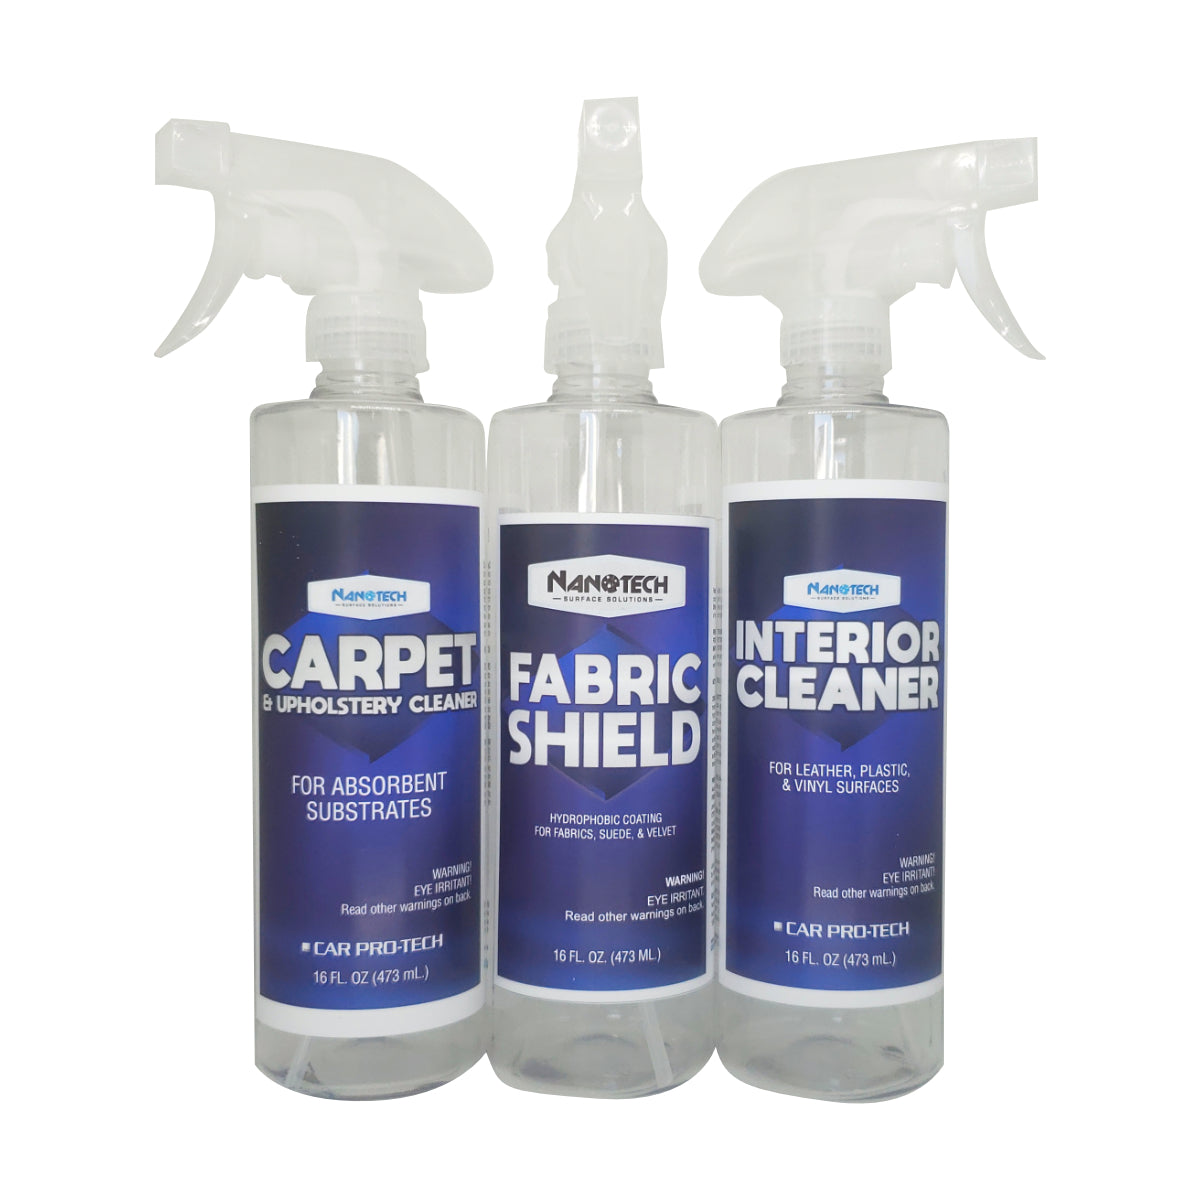 Upholstery and Carpet Cleaners, 16 oz. Spray - Car Cleaner Spray